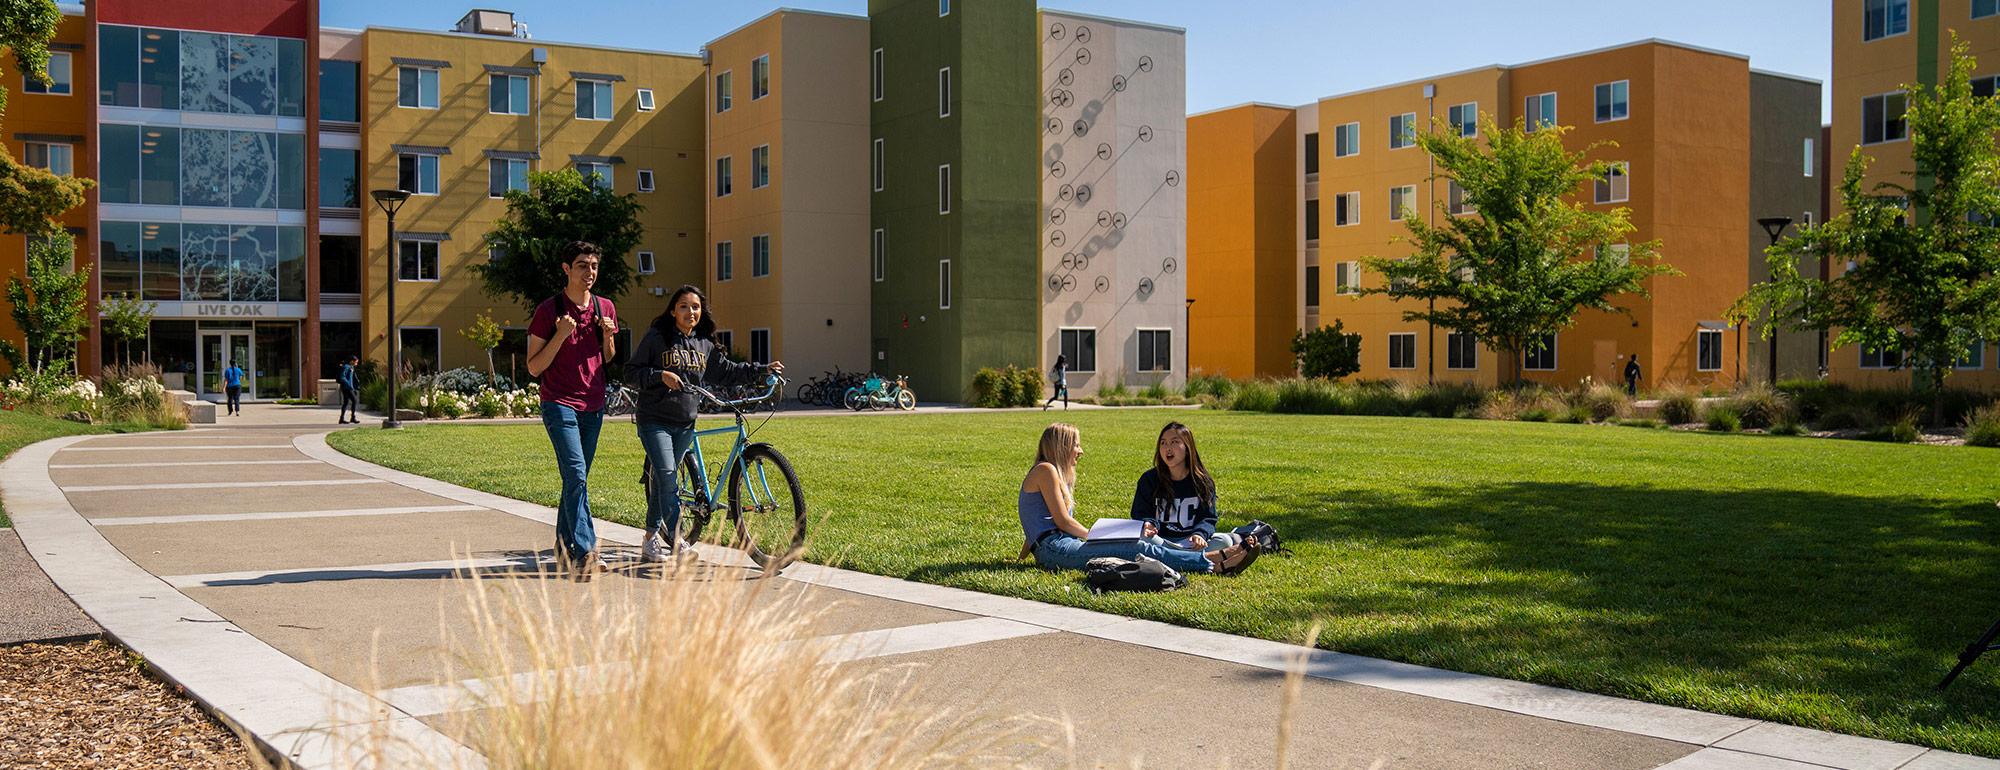 two student walking a bike while two more students are sitting on the grass in front of the residence halls